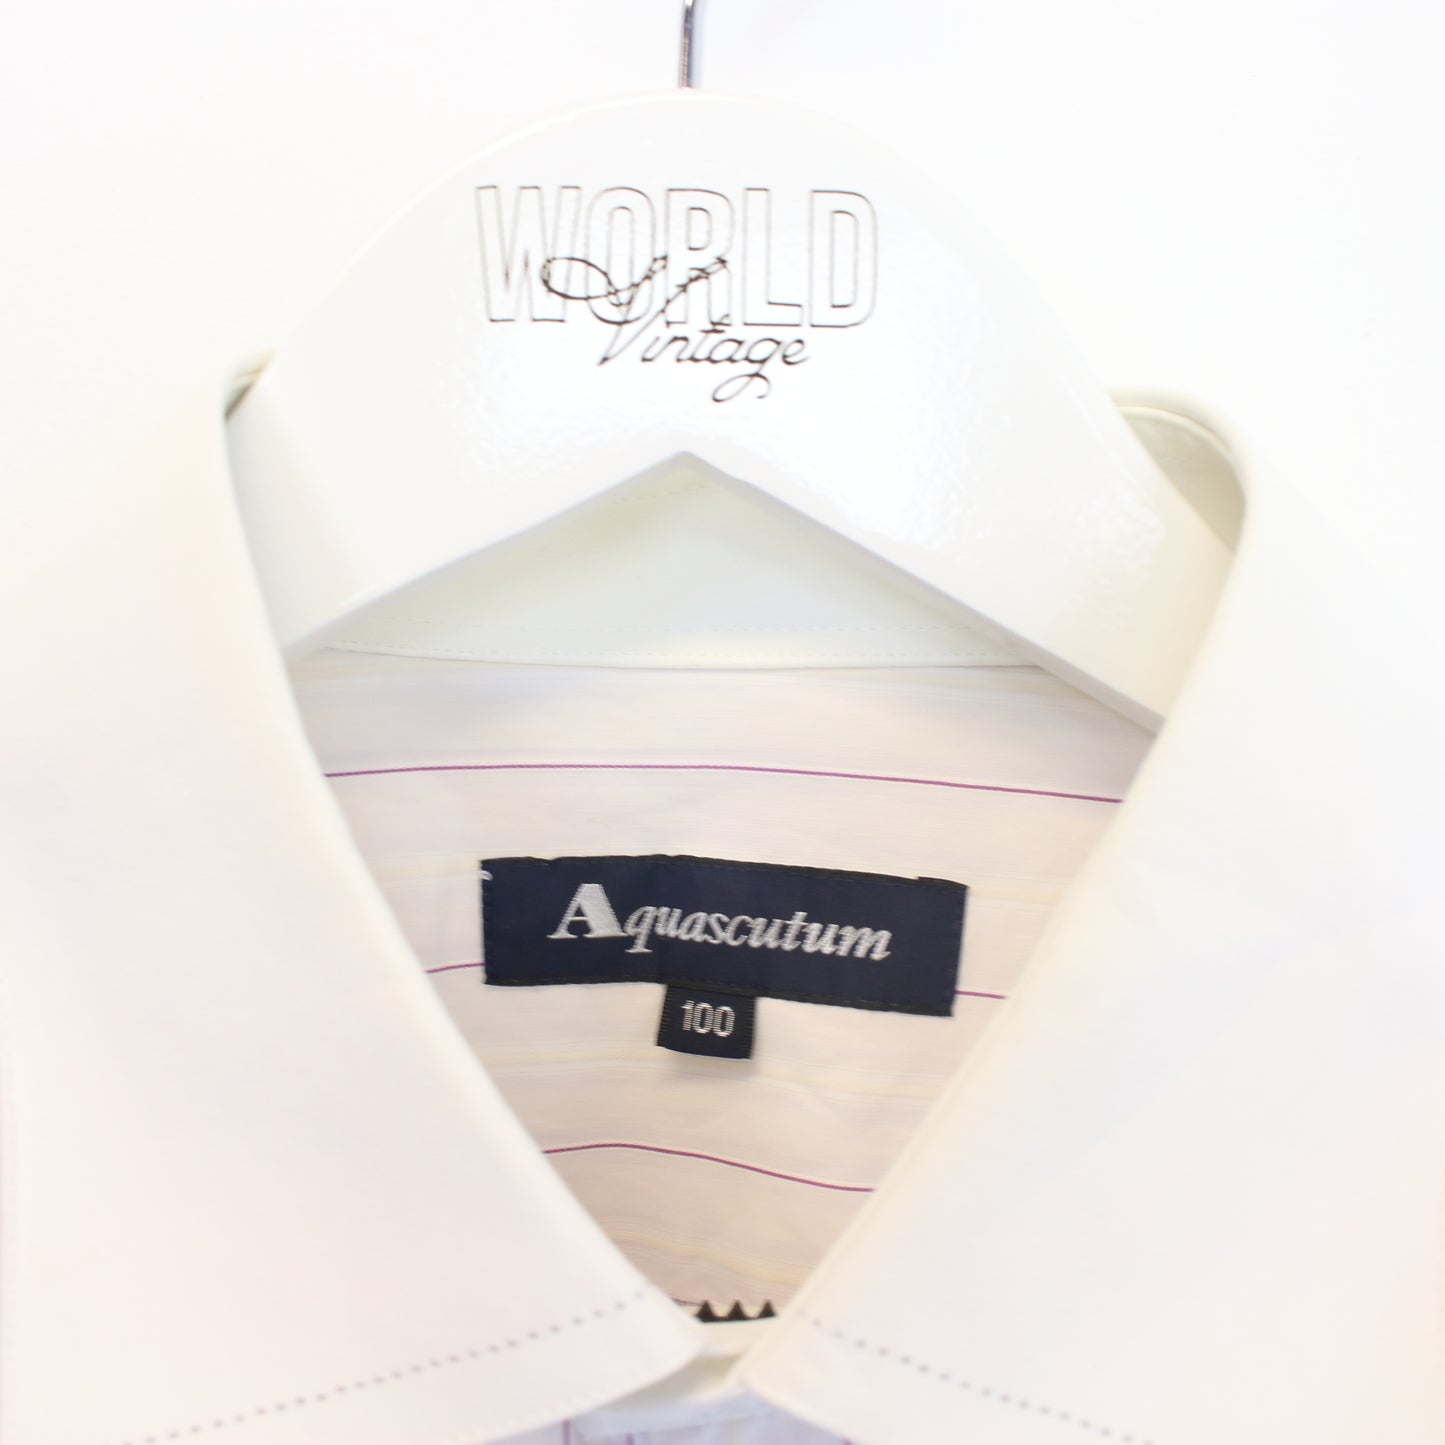 Vintage Aquascutum striped shirt in white and purple. Best fits M